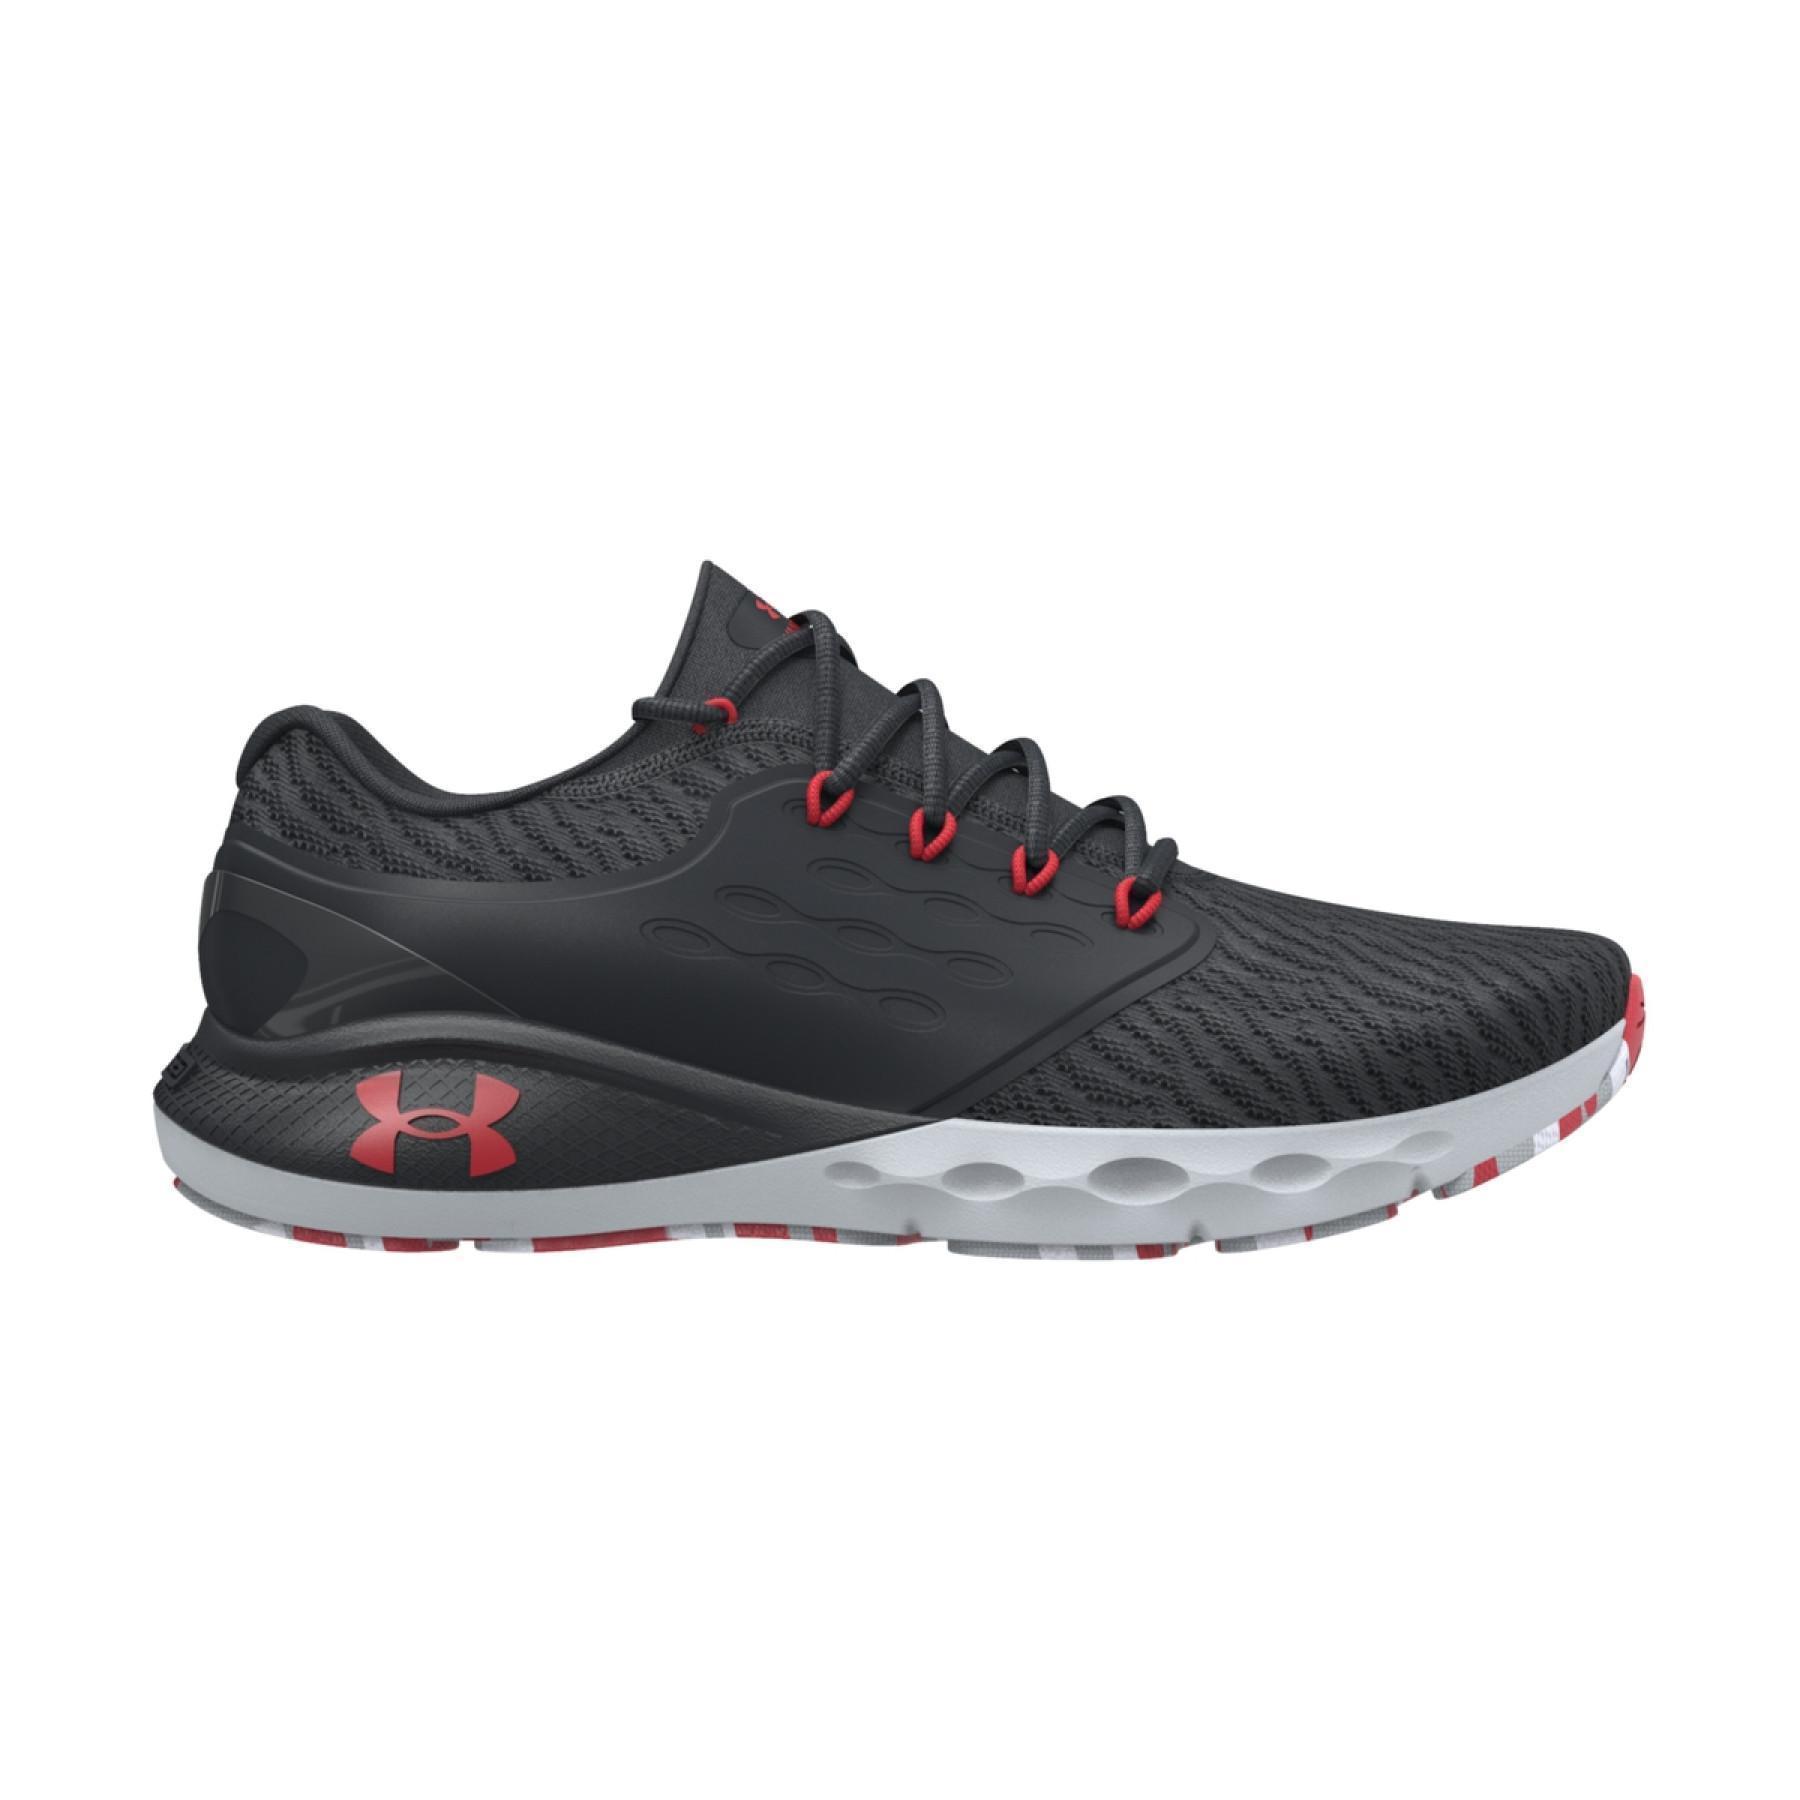 Running shoes Under Armour Charged Vantage Marble